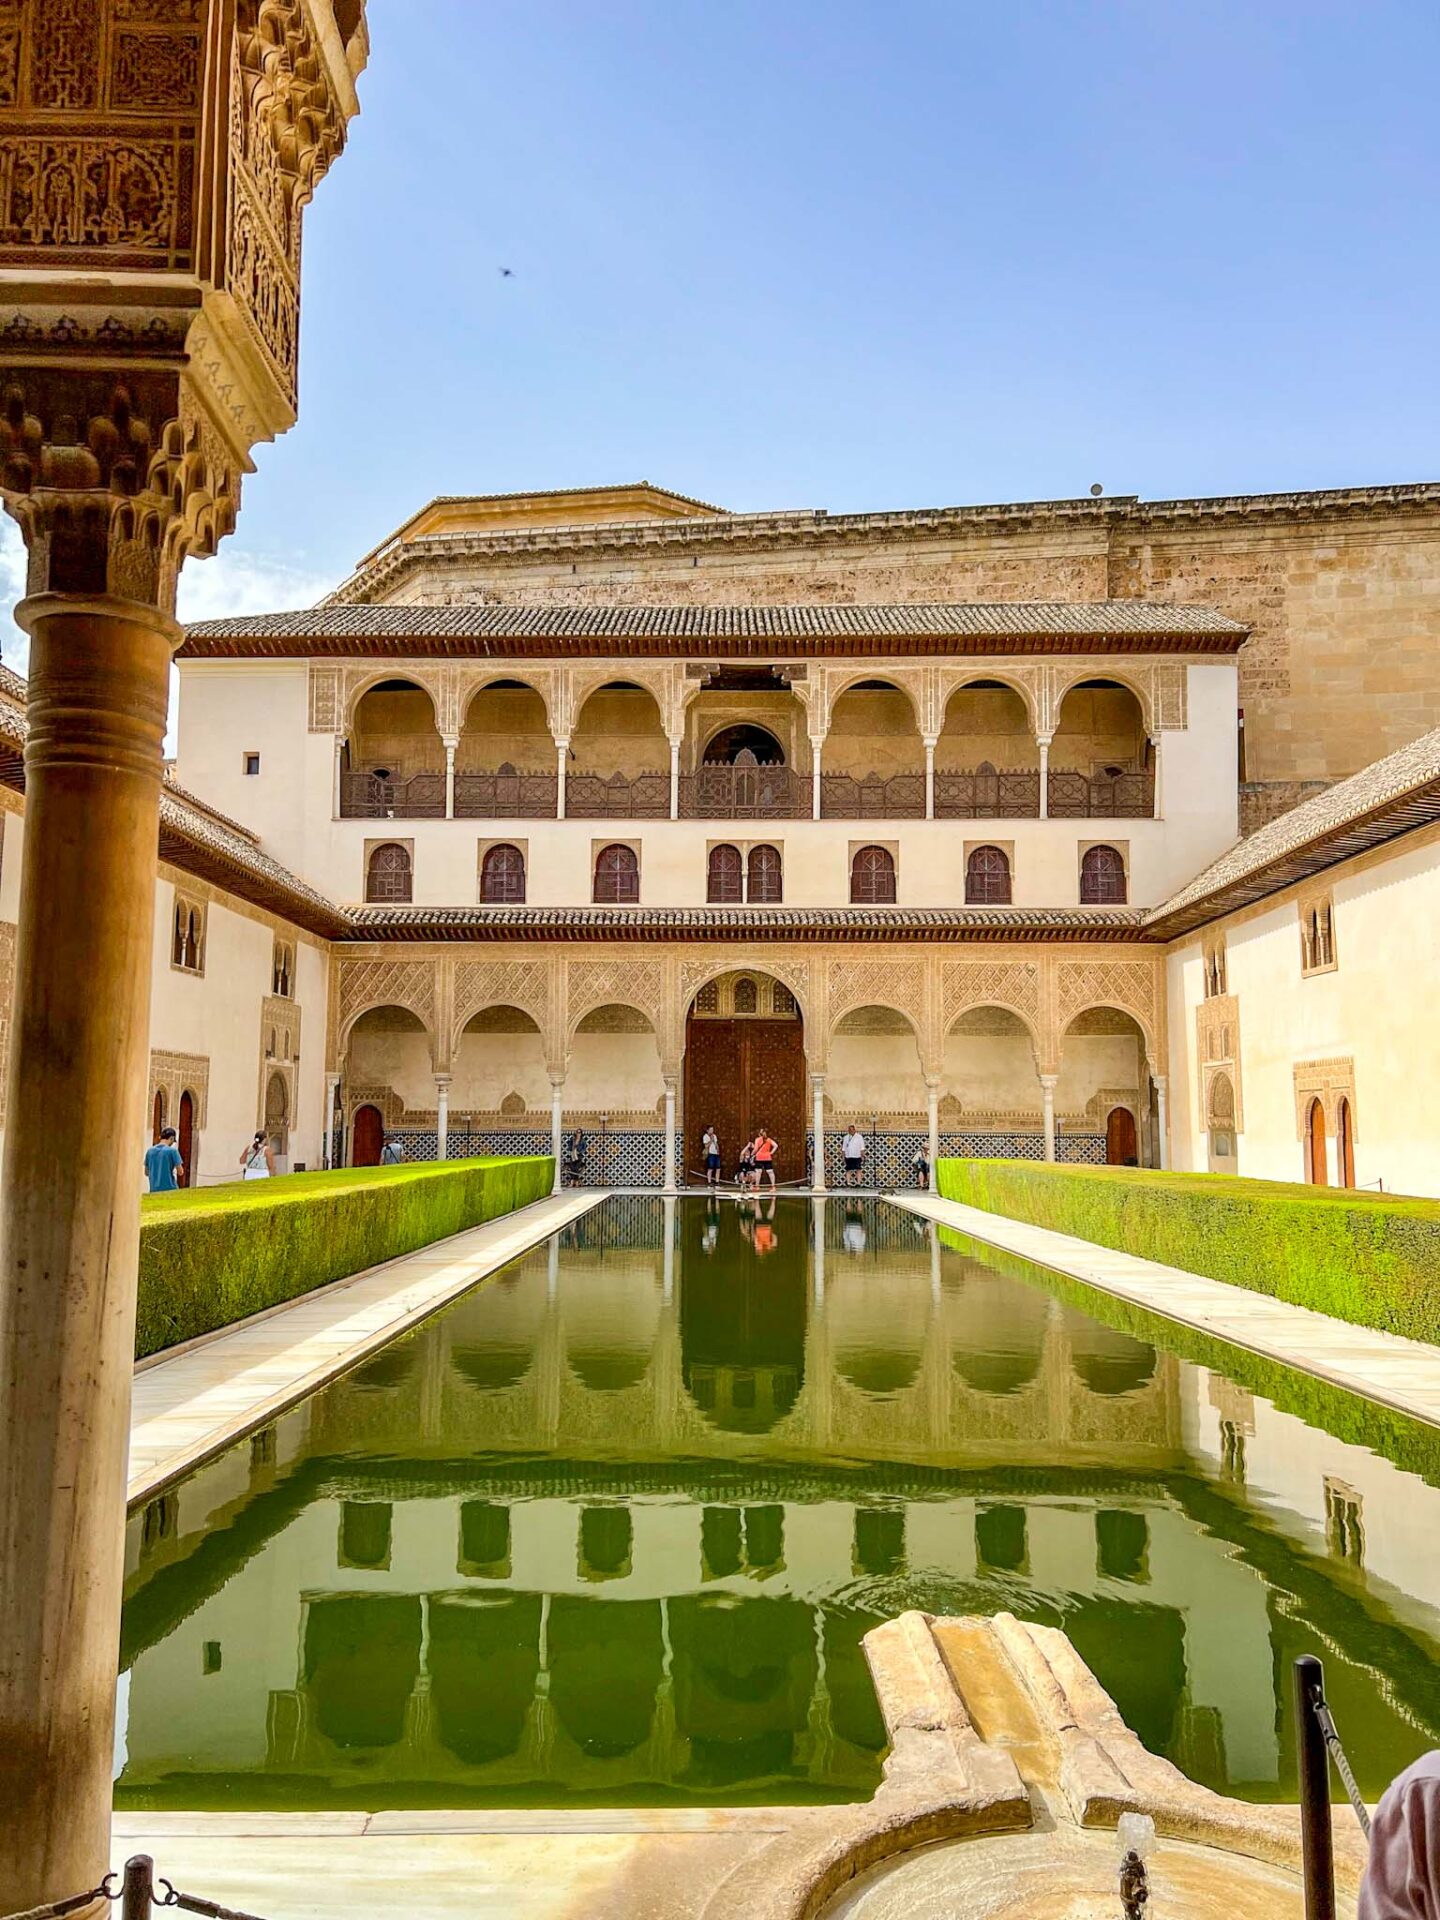 The Wandering Quinn Travel Blog Granada itinerary, One day in Granda, water and palace building in Alhambra